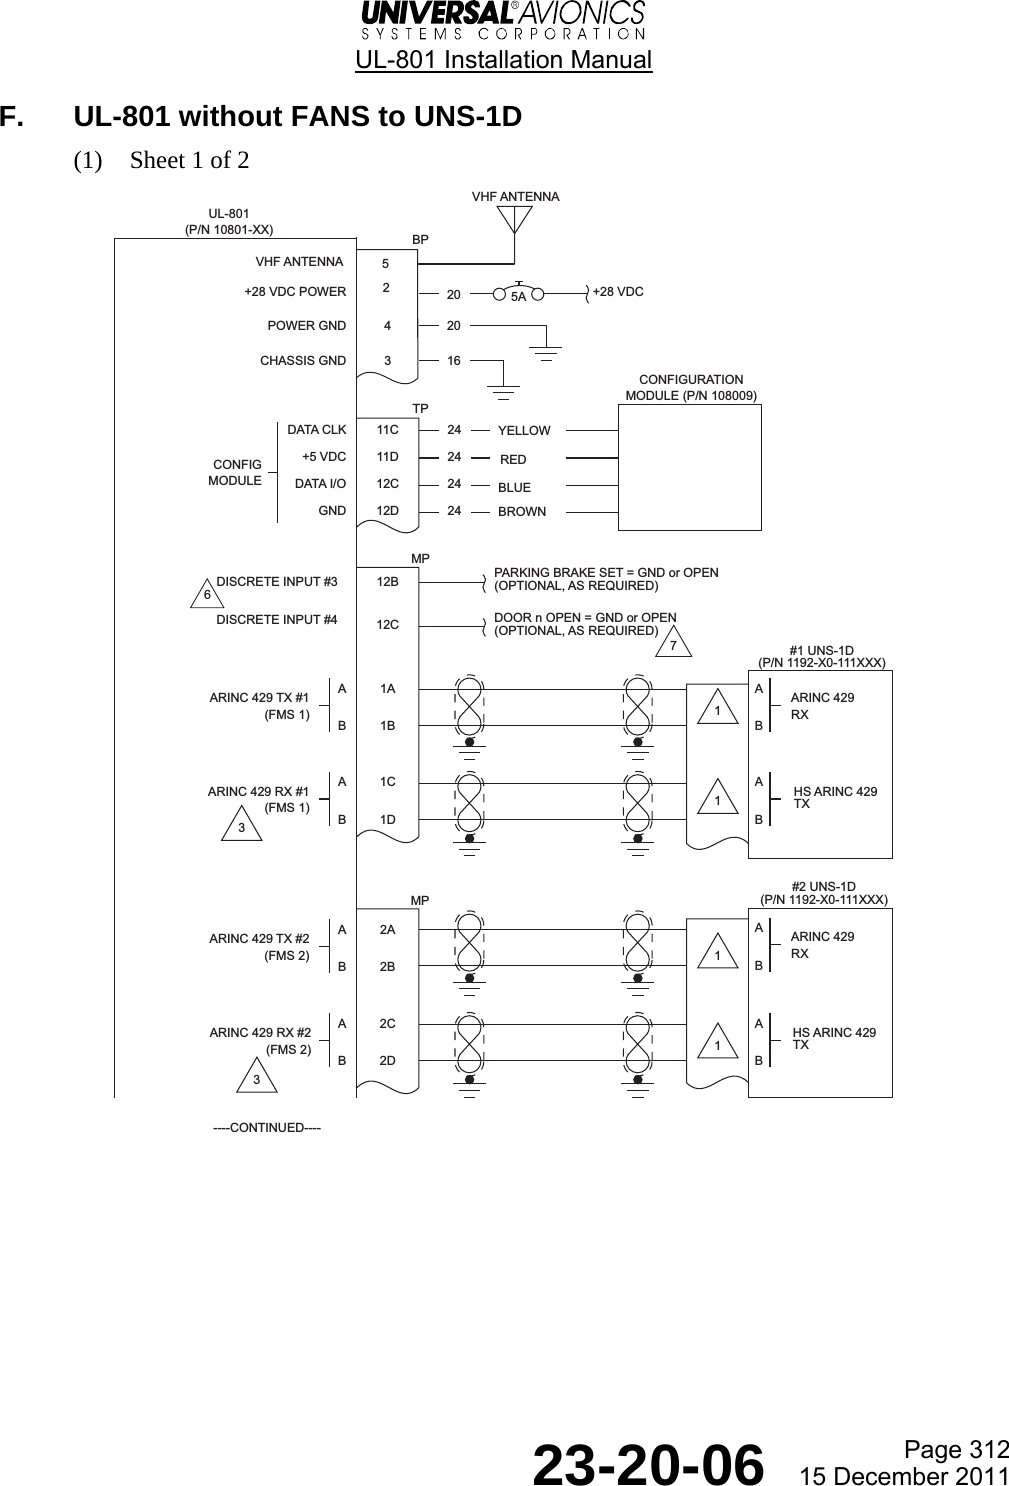  UL-801 Installation Manual  Page 312  23-20-06  15 December 2011 F.  UL-801 without FANS to UNS-1D (1) Sheet 1 of 2   UL-801(P/N 10801-XX)A1AB1BARINC 429 TX #1(FMS 1)#1 UNS-1D(P/N 1192-X0-111XXX)BP+28 VDC POWER 2+28 VDCPOWER GND 4CHASSIS GND 35ATPDATA CLK 11CCONFIGURATIONMODULE (P/N 108009)24+5 VDC 11D 24DATA I/O 12C 24GND 12D 24CONFIGMODULEMPDISCRETE INPUT #3 12B PARKING BRAKE SET = GND or OPEN(OPTIONAL, AS REQUIRED)DISCRETE INPUT #4 12C DOOR n OPEN = GND or OPEN(OPTIONAL, AS REQUIRED)ABARINC 429RXA1CB1DARINC 429 RX #1(FMS 1)ABHS ARINC 429TX#2 UNS-1D(P/N 1192-X0-111XXX)ABARINC 429RXA2CB2DARINC 429 RX #2(FMS 2)ABHS ARINC 429TXMP----CONTINUED----202016A2AB2BARINC 429 TX #2(FMS 2)YELLOWREDBLUEBROWN31111376VHF ANTENNA5VHF ANTENNA